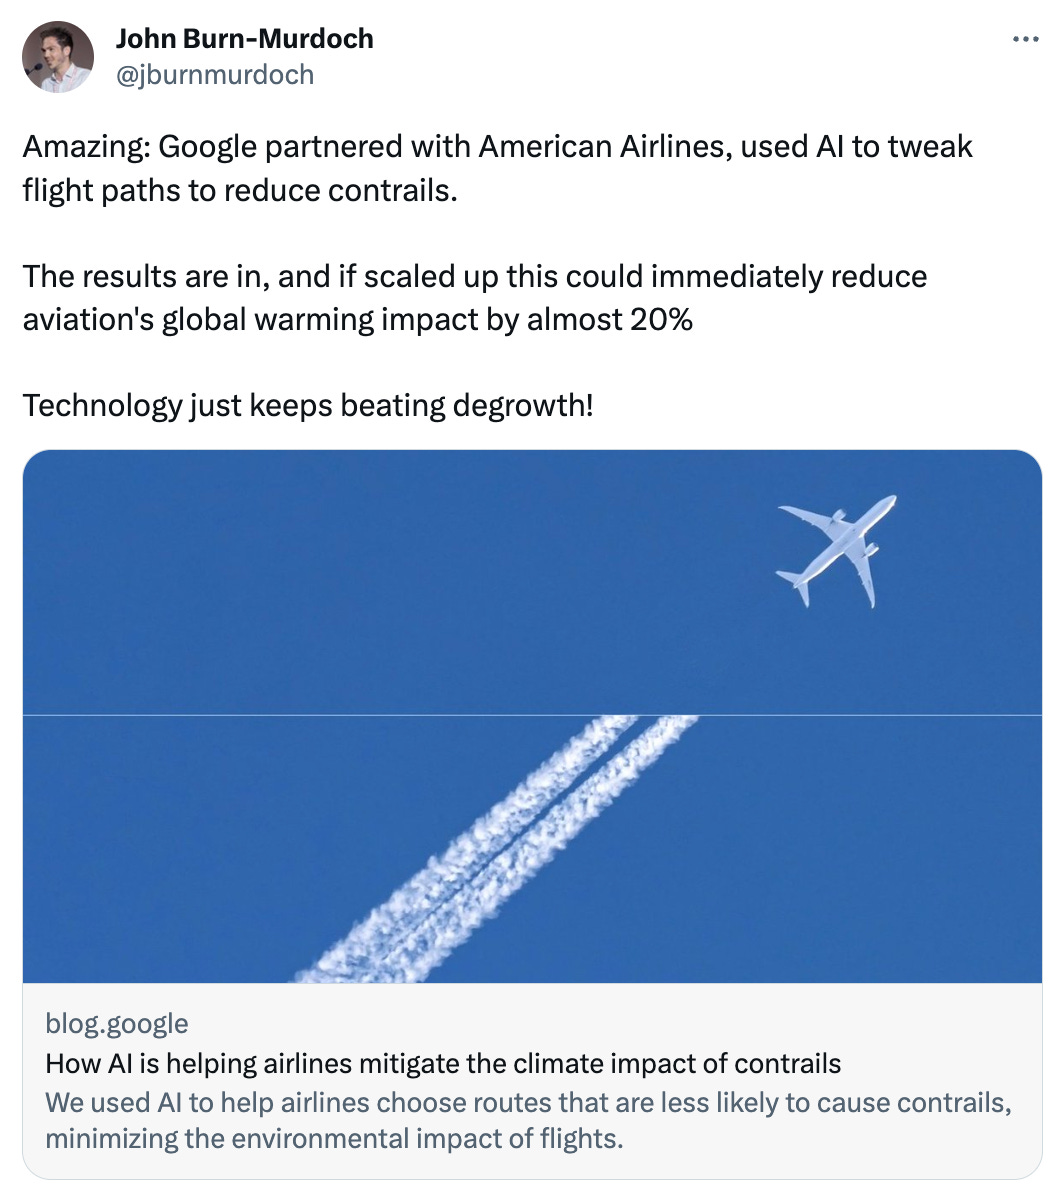  See new Tweets Conversation John Burn-Murdoch @jburnmurdoch Amazing: Google partnered with American Airlines, used AI to tweak flight paths to reduce contrails.  The results are in, and if scaled up this could immediately reduce aviation's global warming impact by almost 20%  Technology just keeps beating degrowth! blog.google How AI is helping airlines mitigate the climate impact of contrails We used AI to help airlines choose routes that are less likely to cause contrails, minimizing the environmental impact of flights.